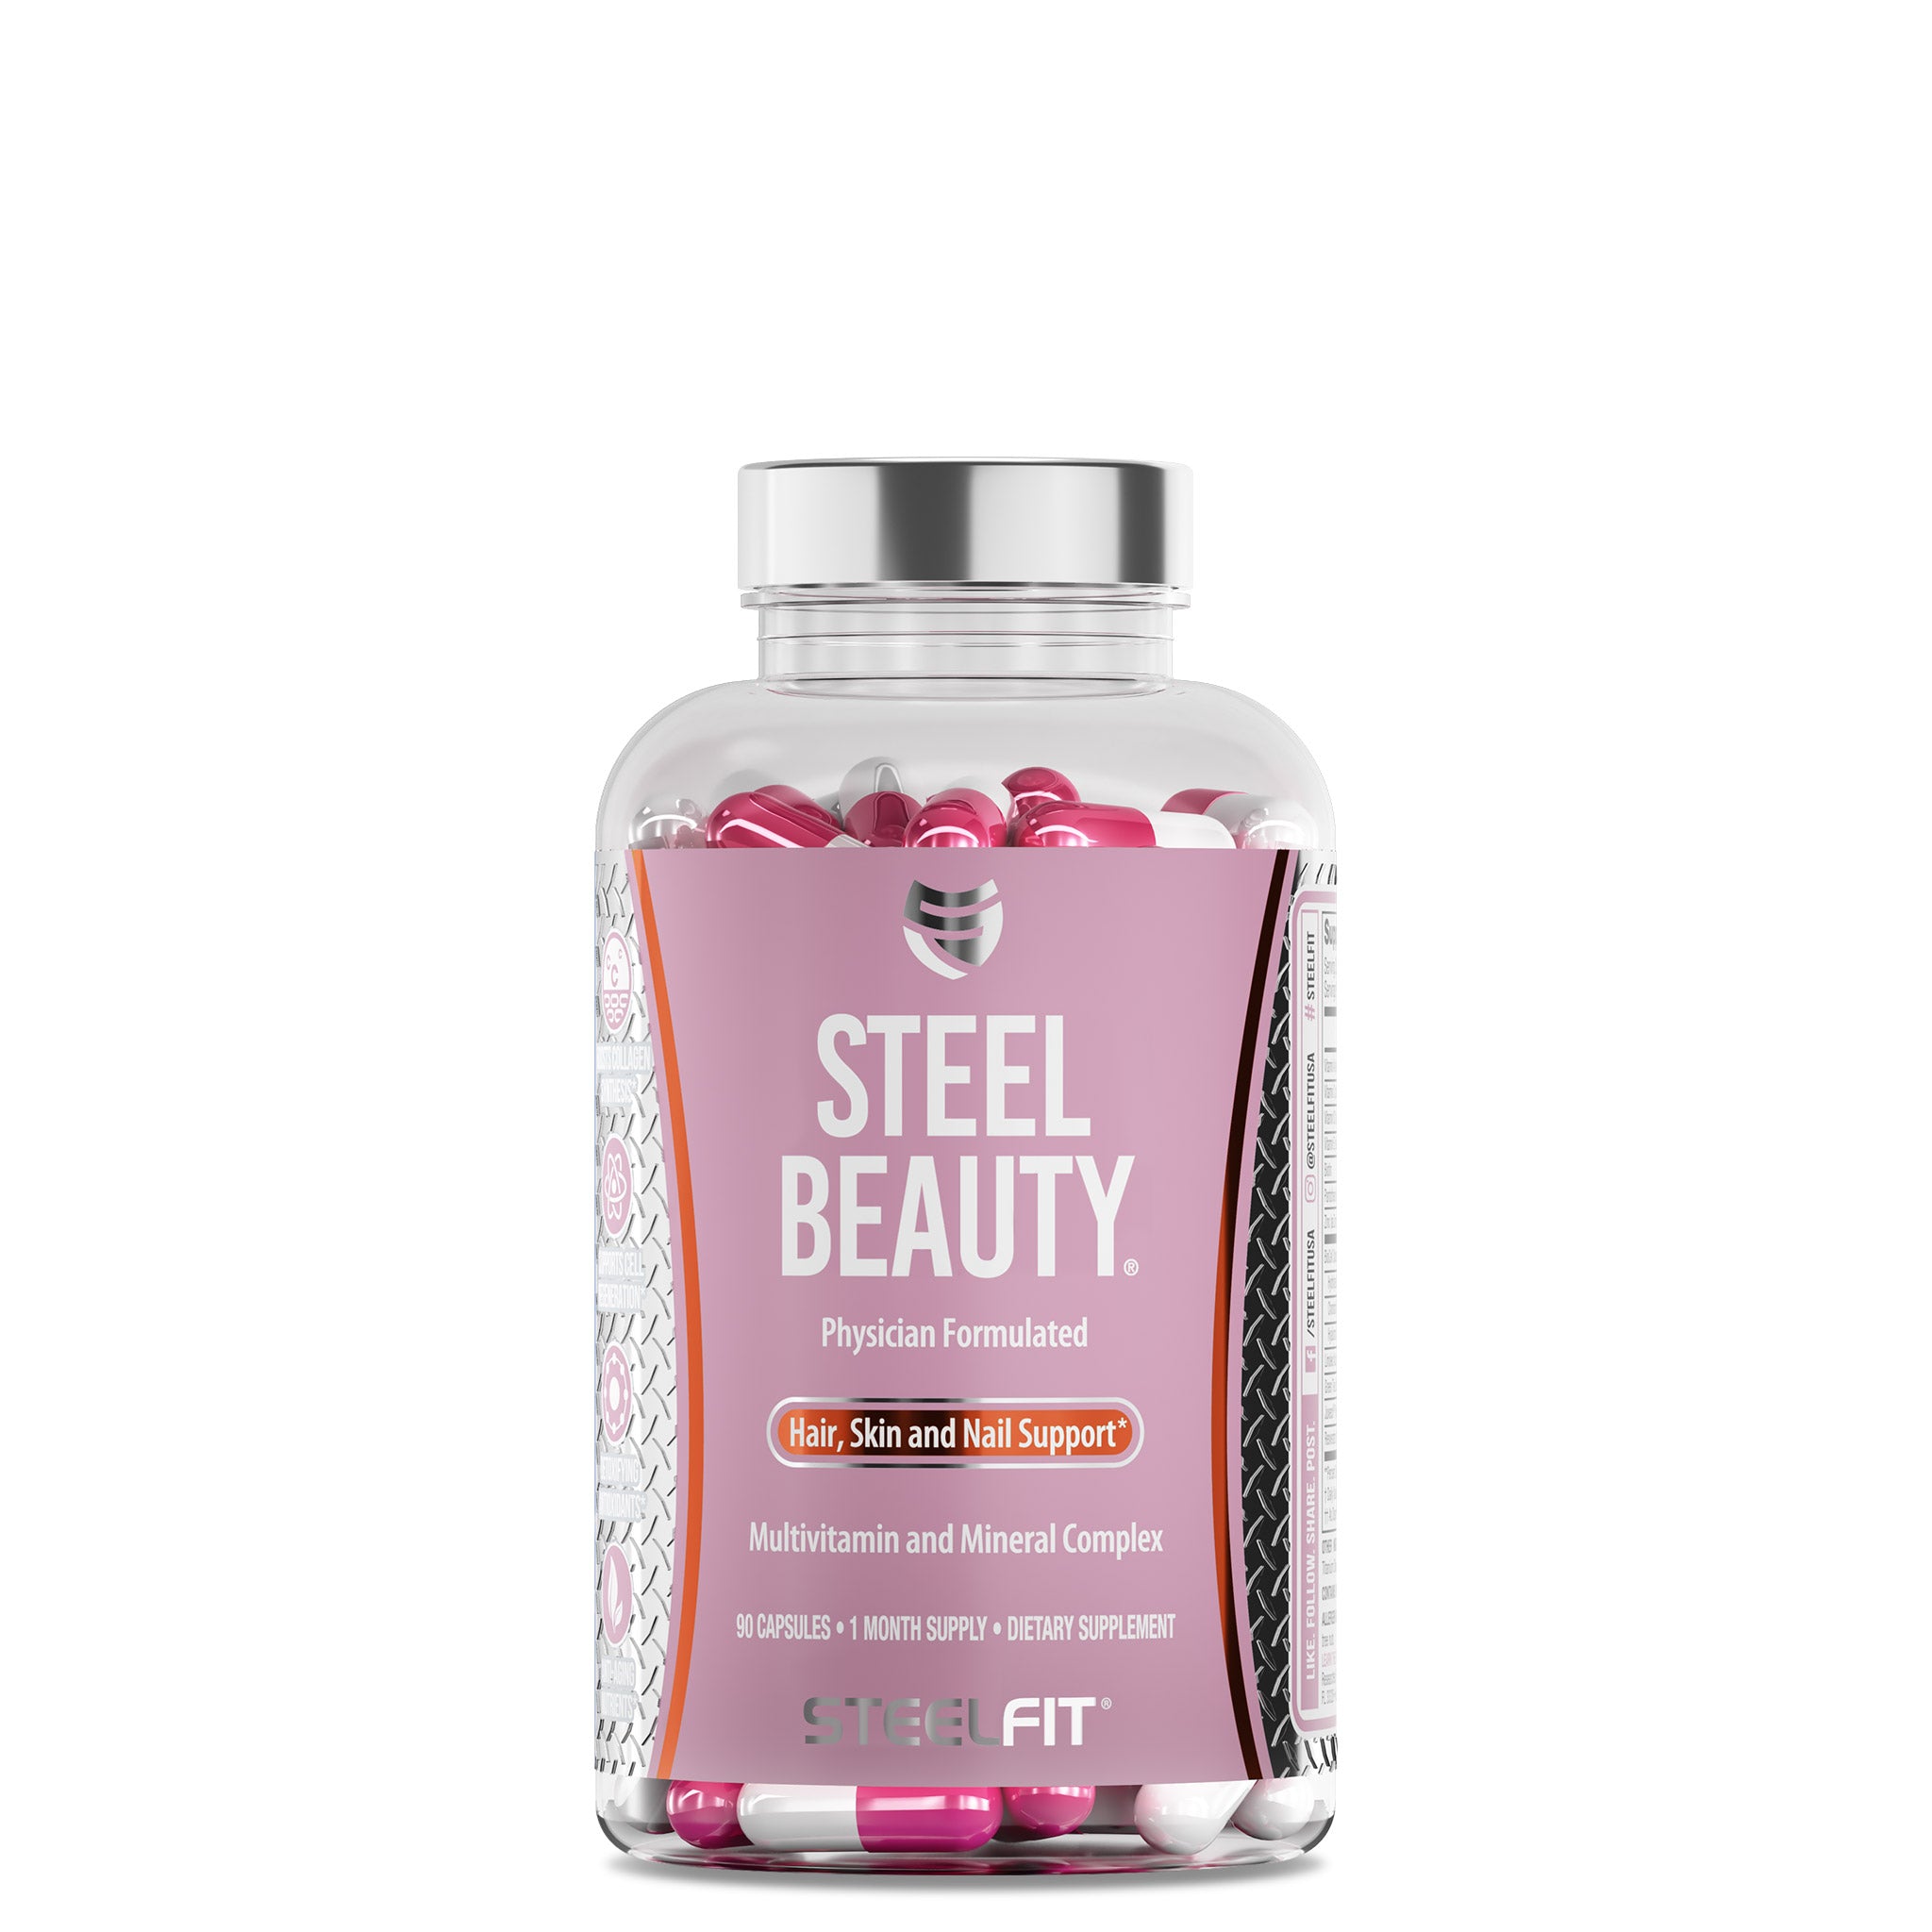 steel beauty hair skin and nail multivitamin with biotin and natural ingredients for strong nails and beautiful hair and skin